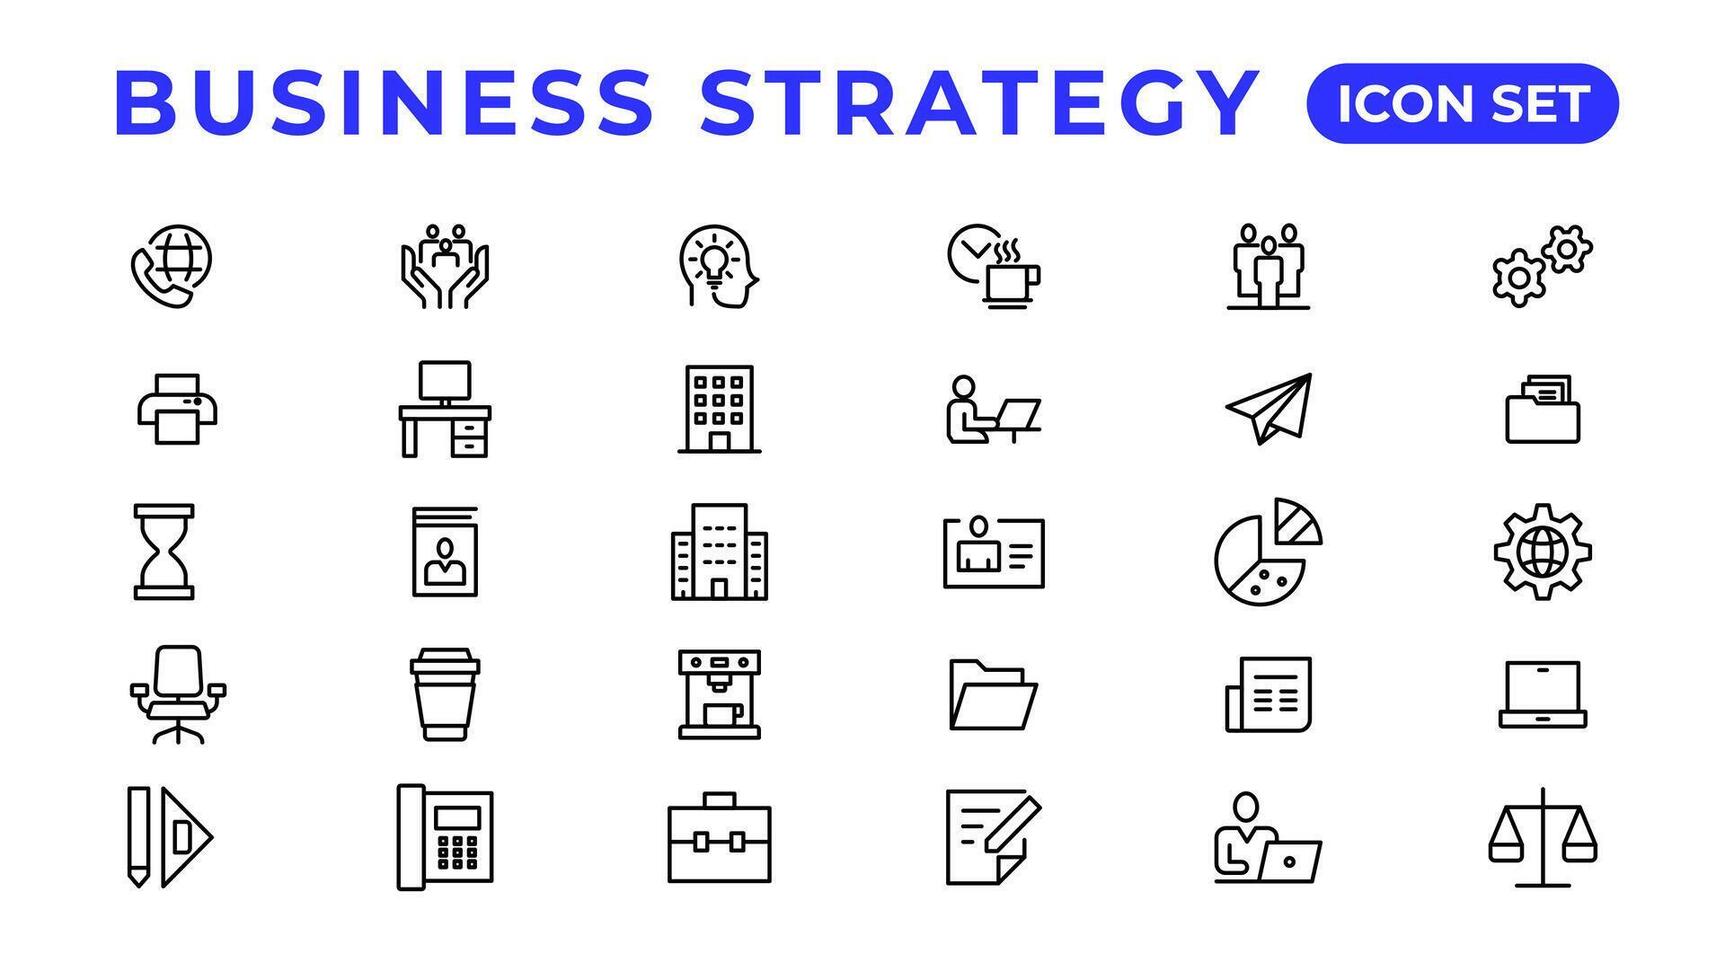 Business strategy set of web icons in line style. Business solutions icons for web and mobile app. Action List, research, solution, team, marketing, startup, advertising, business process vector